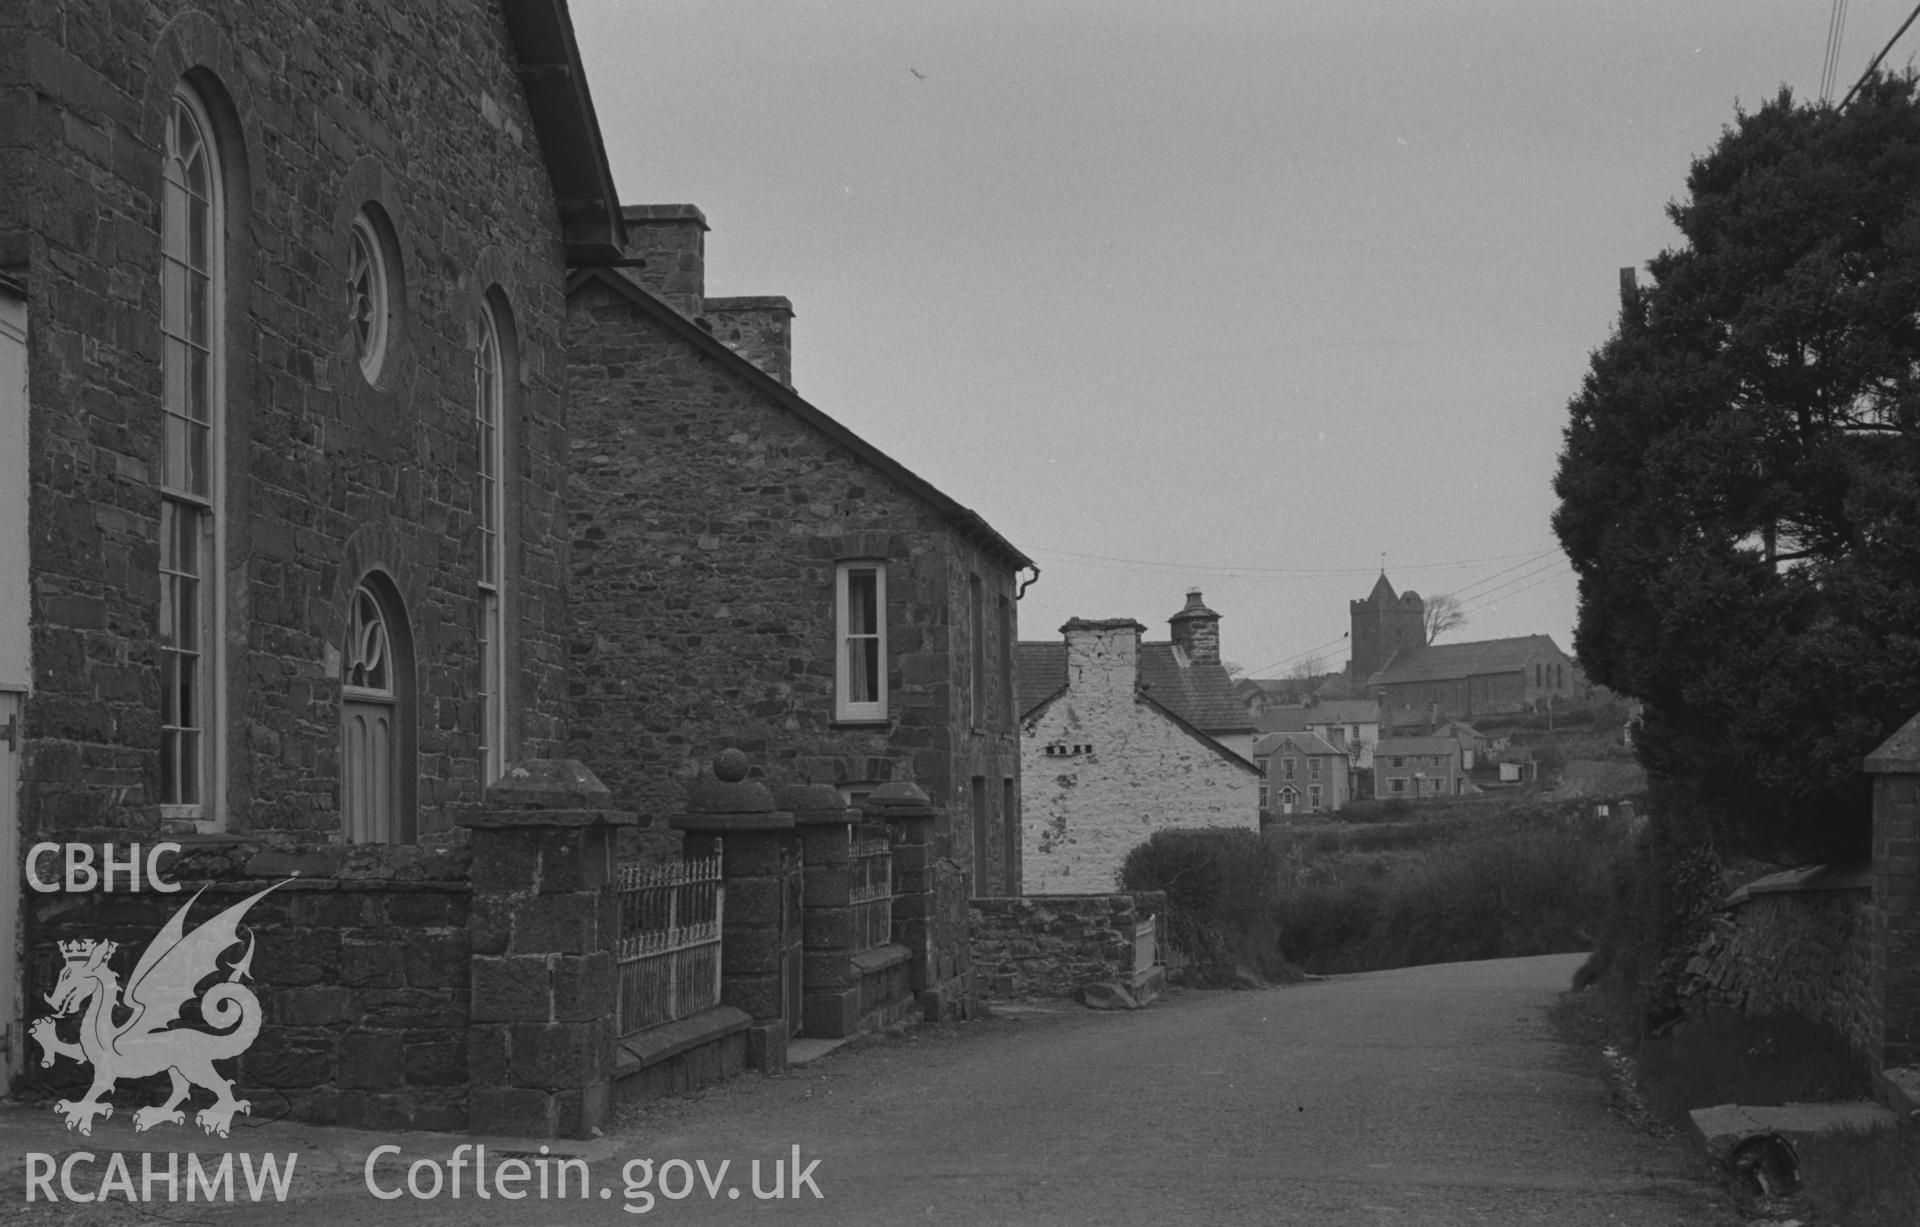 Digital copy of a black and white negative showing Fronwen Welsh Calvinistic Methodist Chapel with church beyond, and other buildings in Llanarth. Photographed by Arthur O. Chater on 13th April 1967 looking west from Grid Reference SN 425 577.